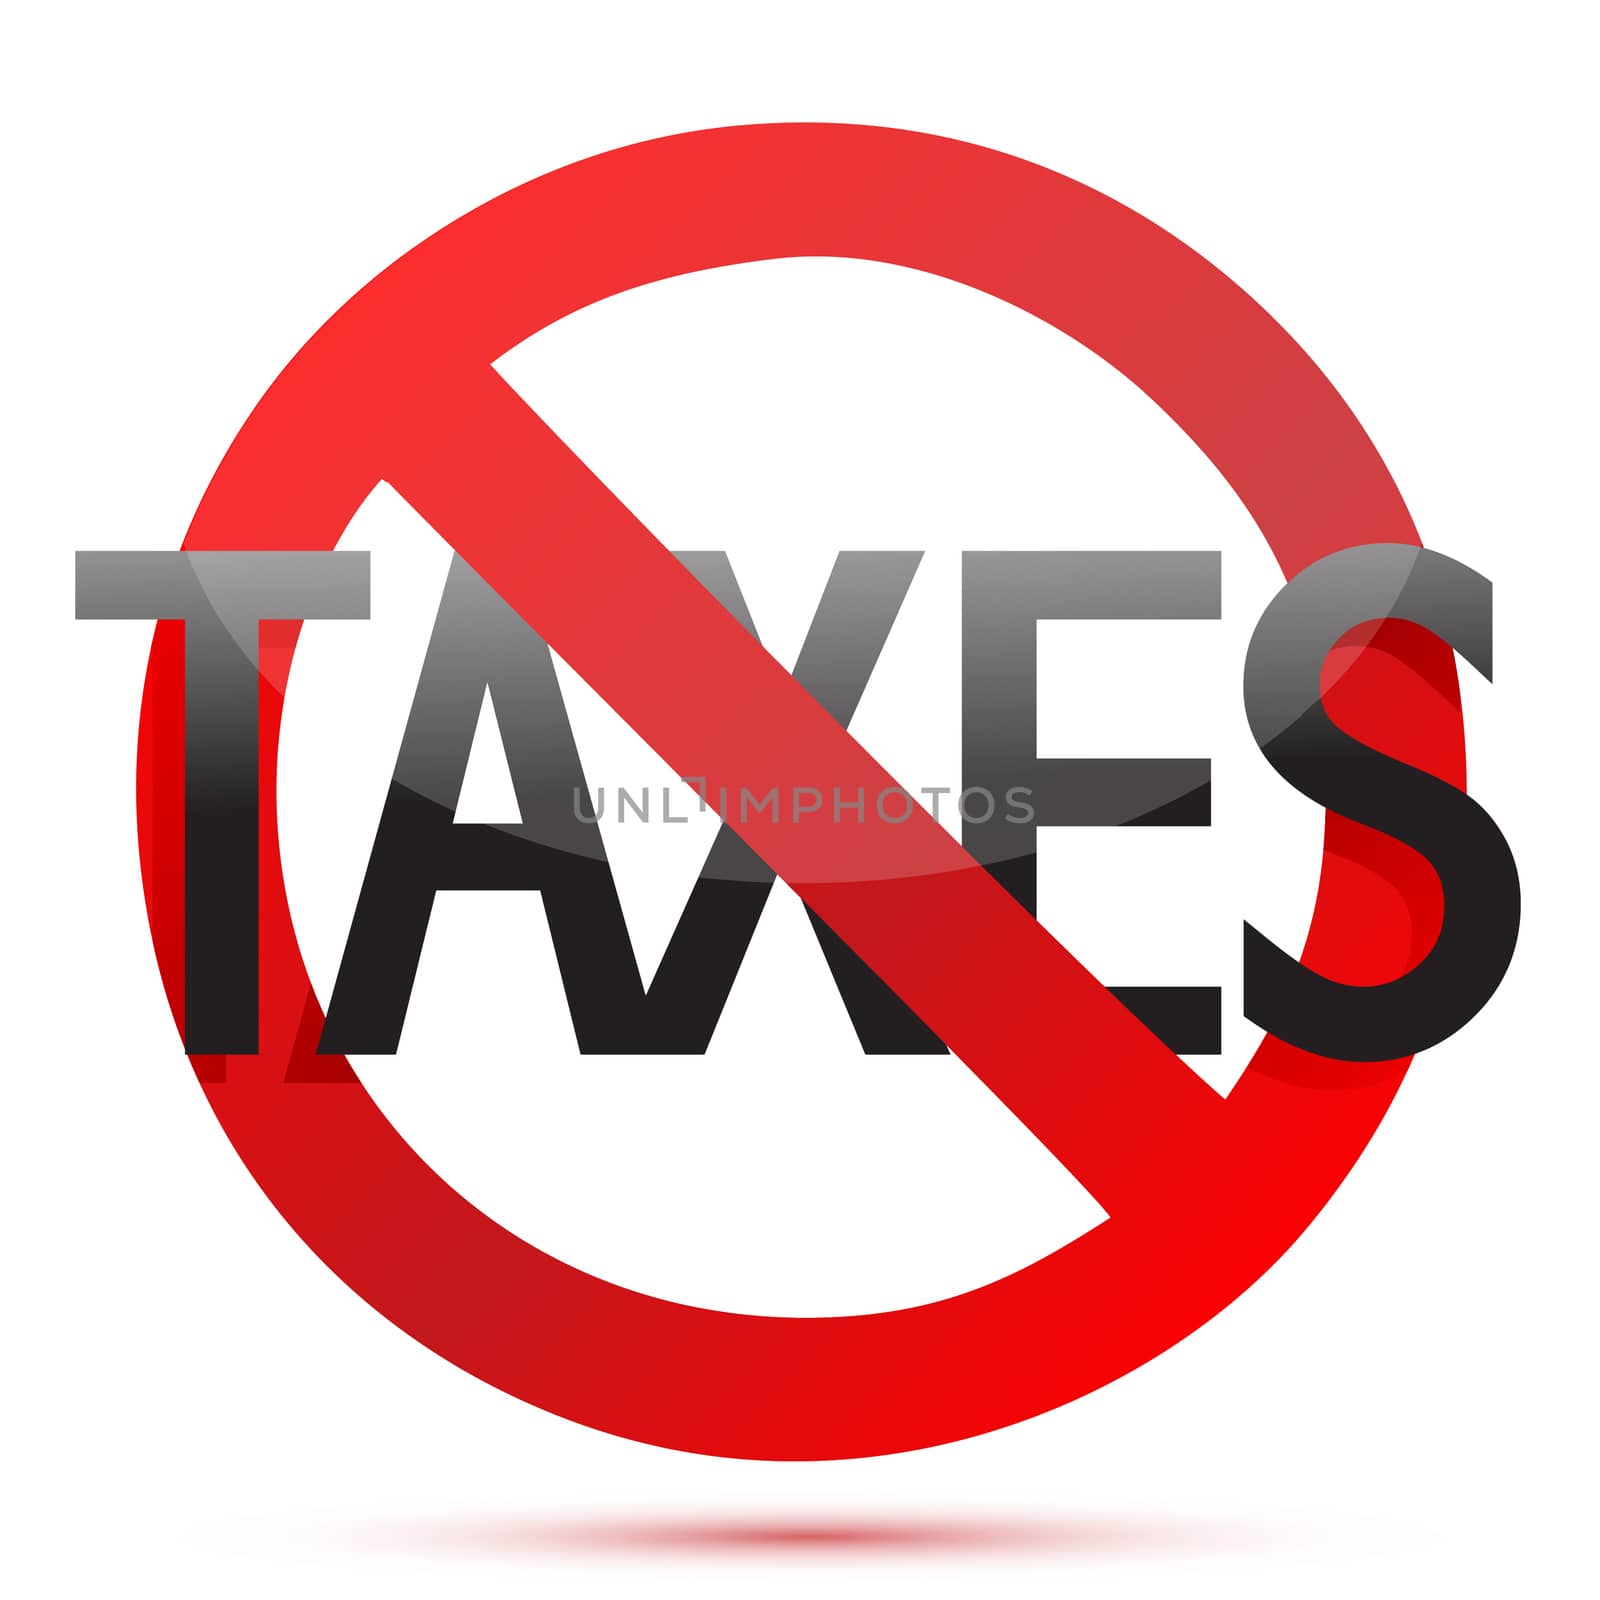 no taxes illustration design over white background by alexmillos